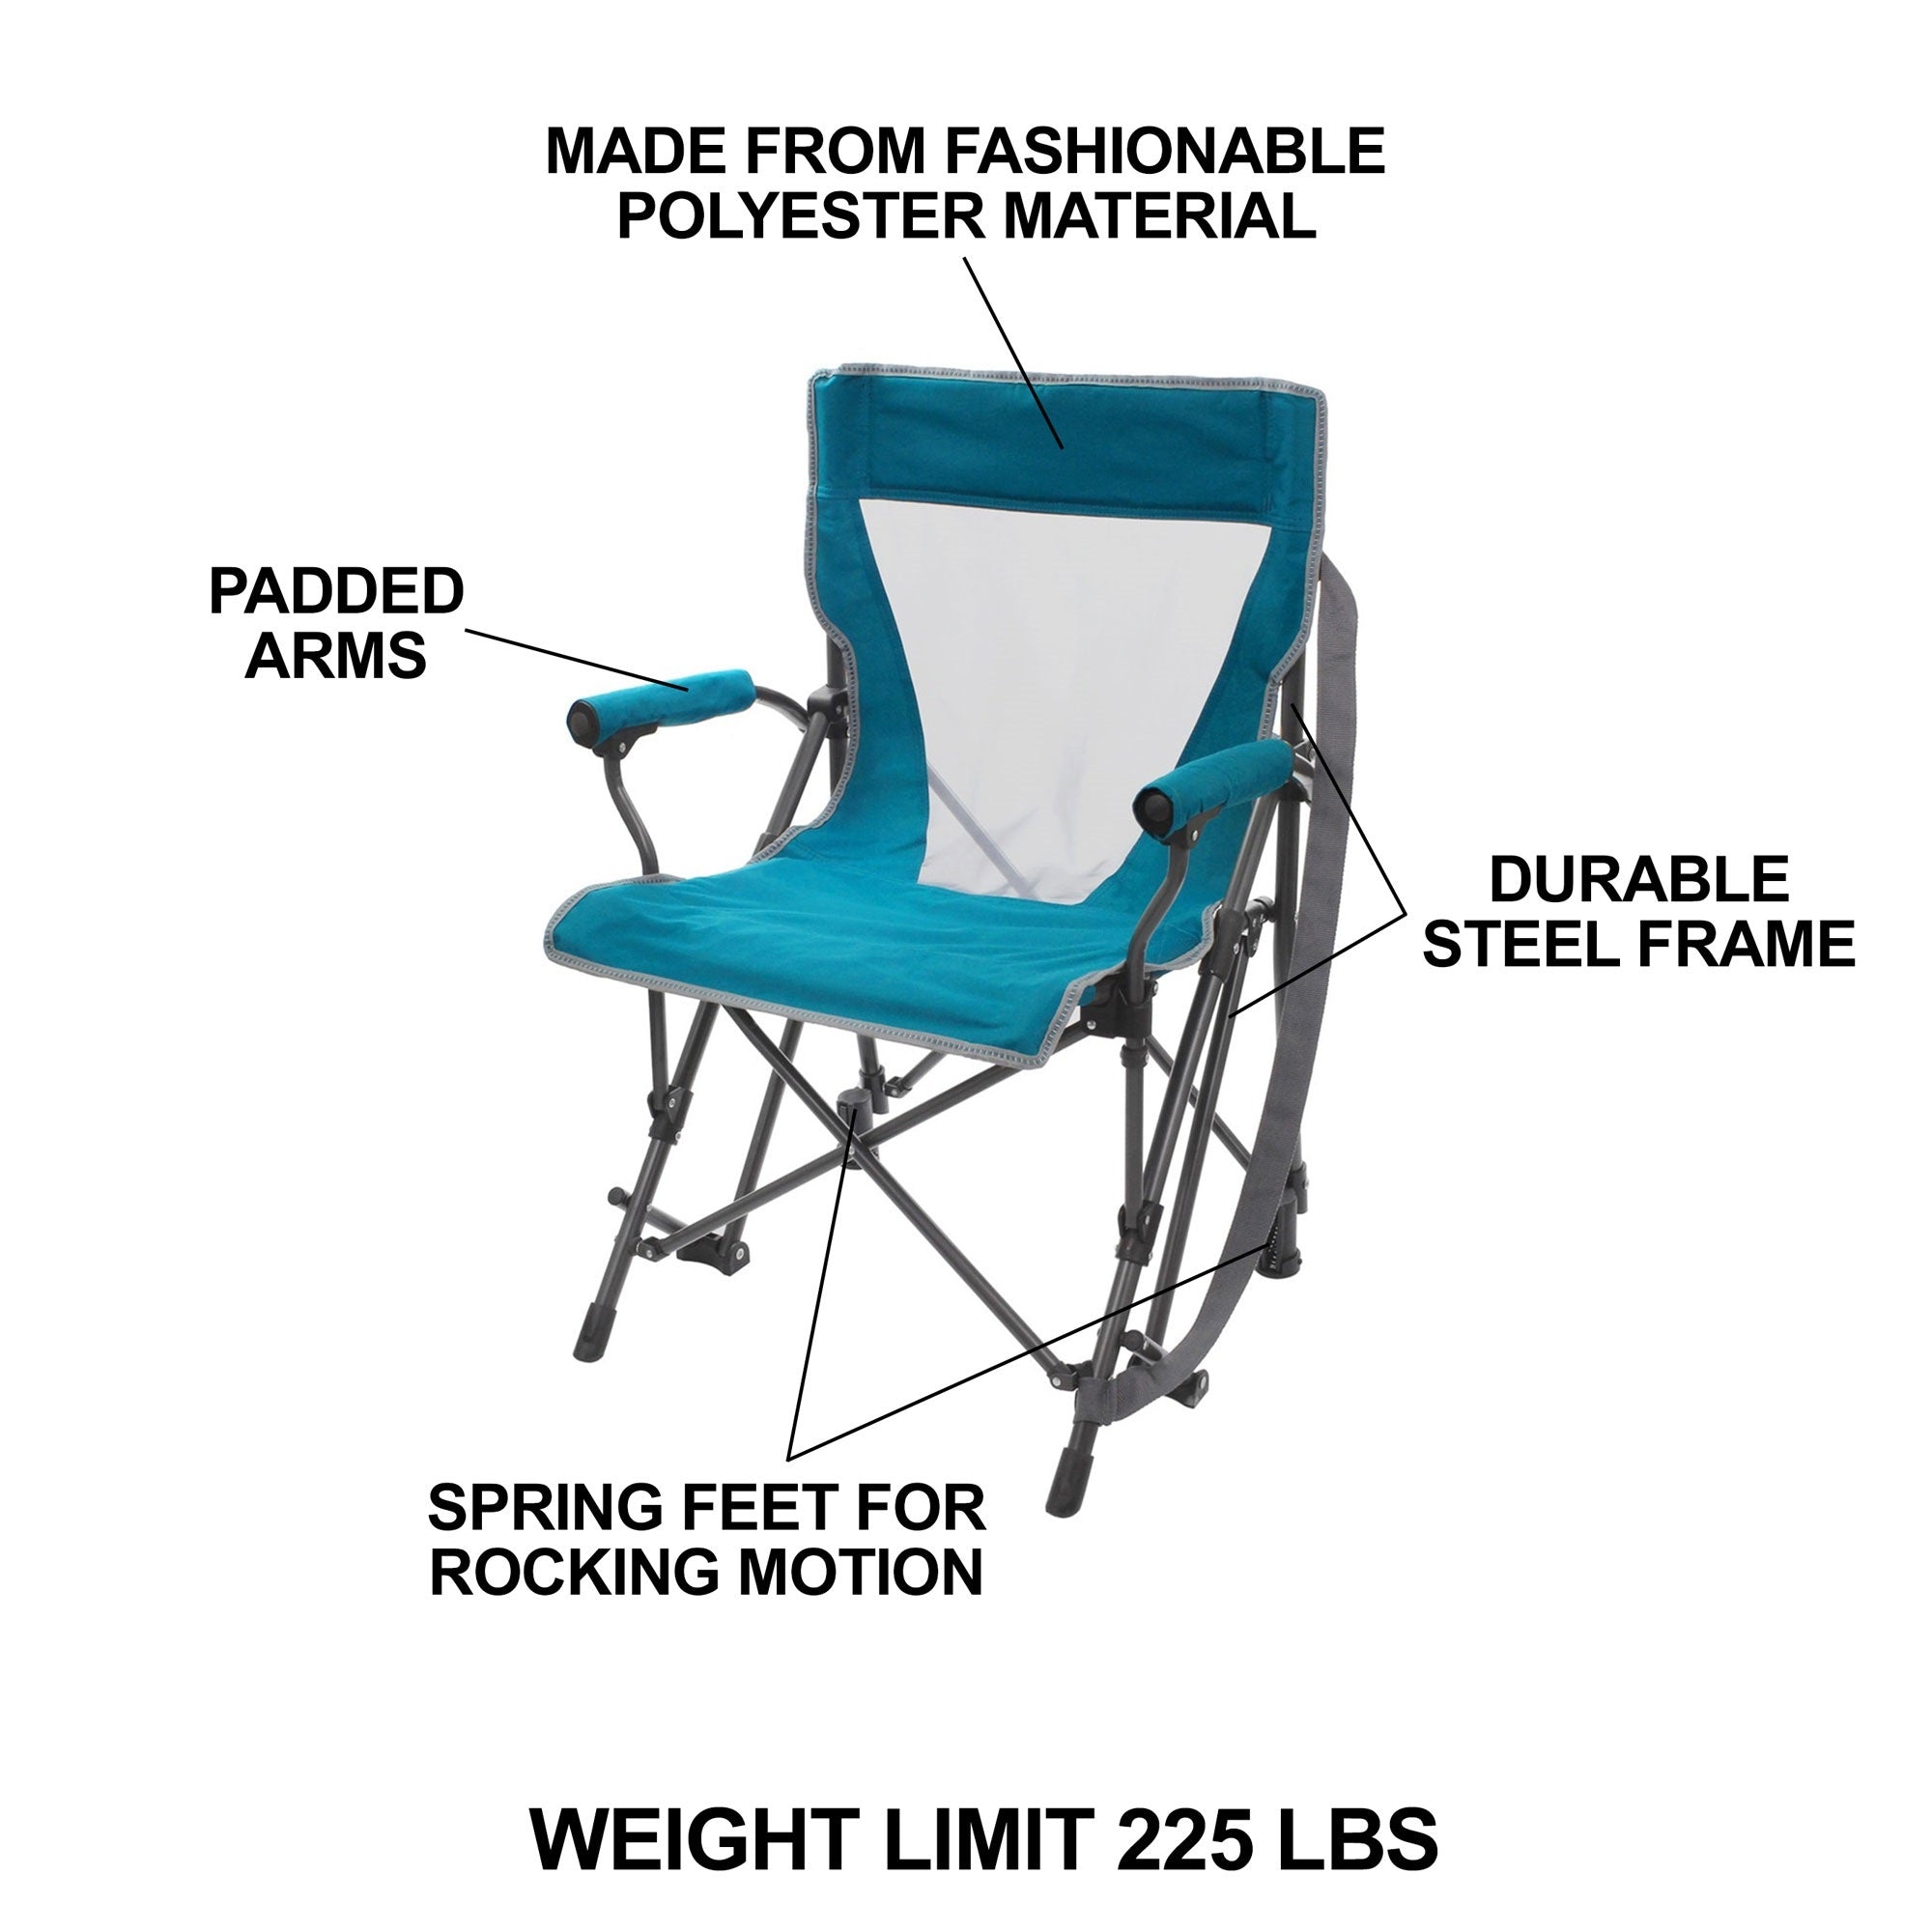 Zenithen Limited Padded Hard Arm Outdoor Rocker Chair for Camping/Sporting Events, Teal